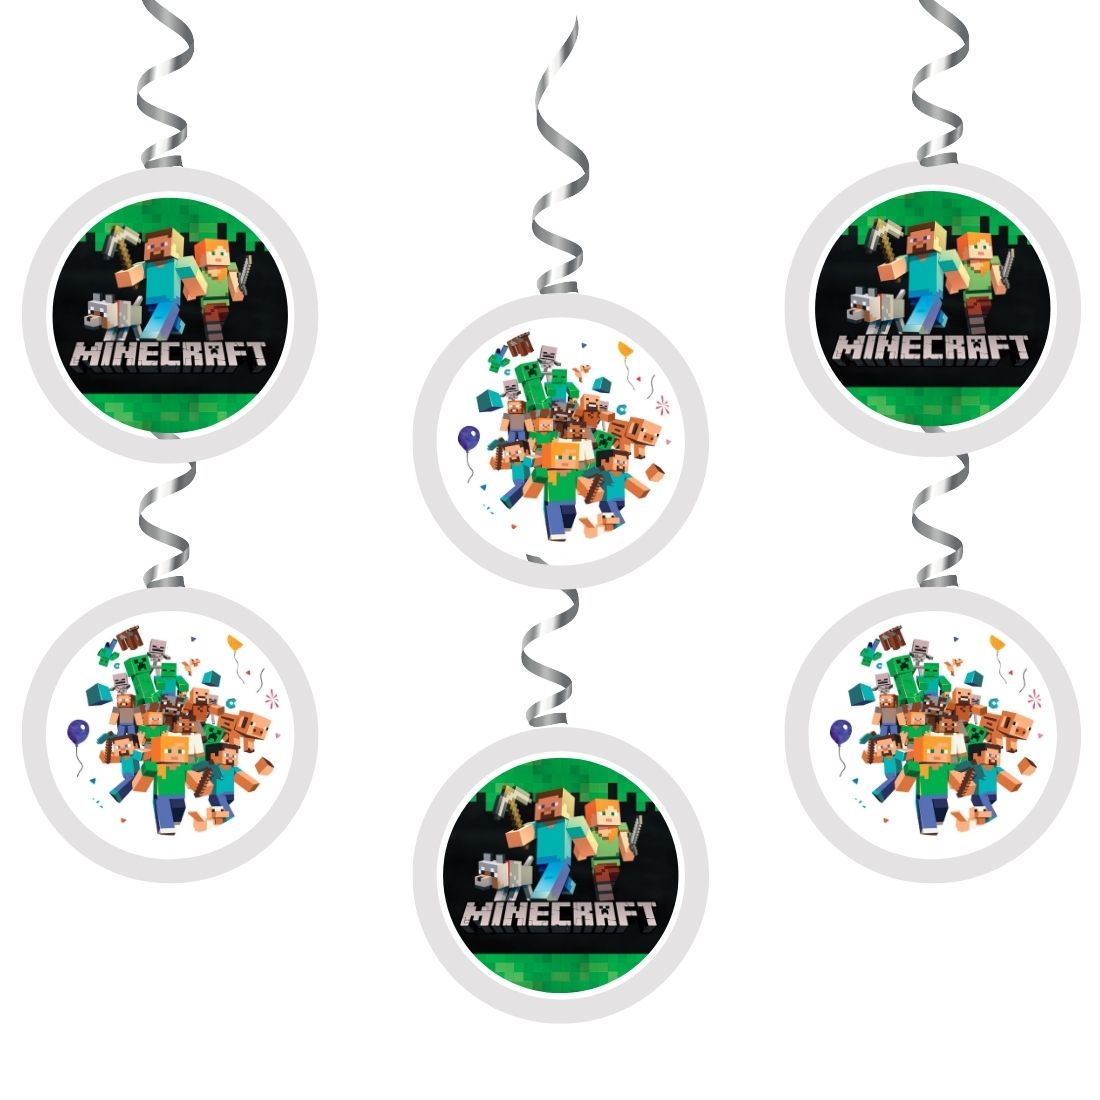 Minecraft Theme Hanging Danglers - Set of 6, Double-Sided Prints, 6 Inches Each with Hanging Ribbon